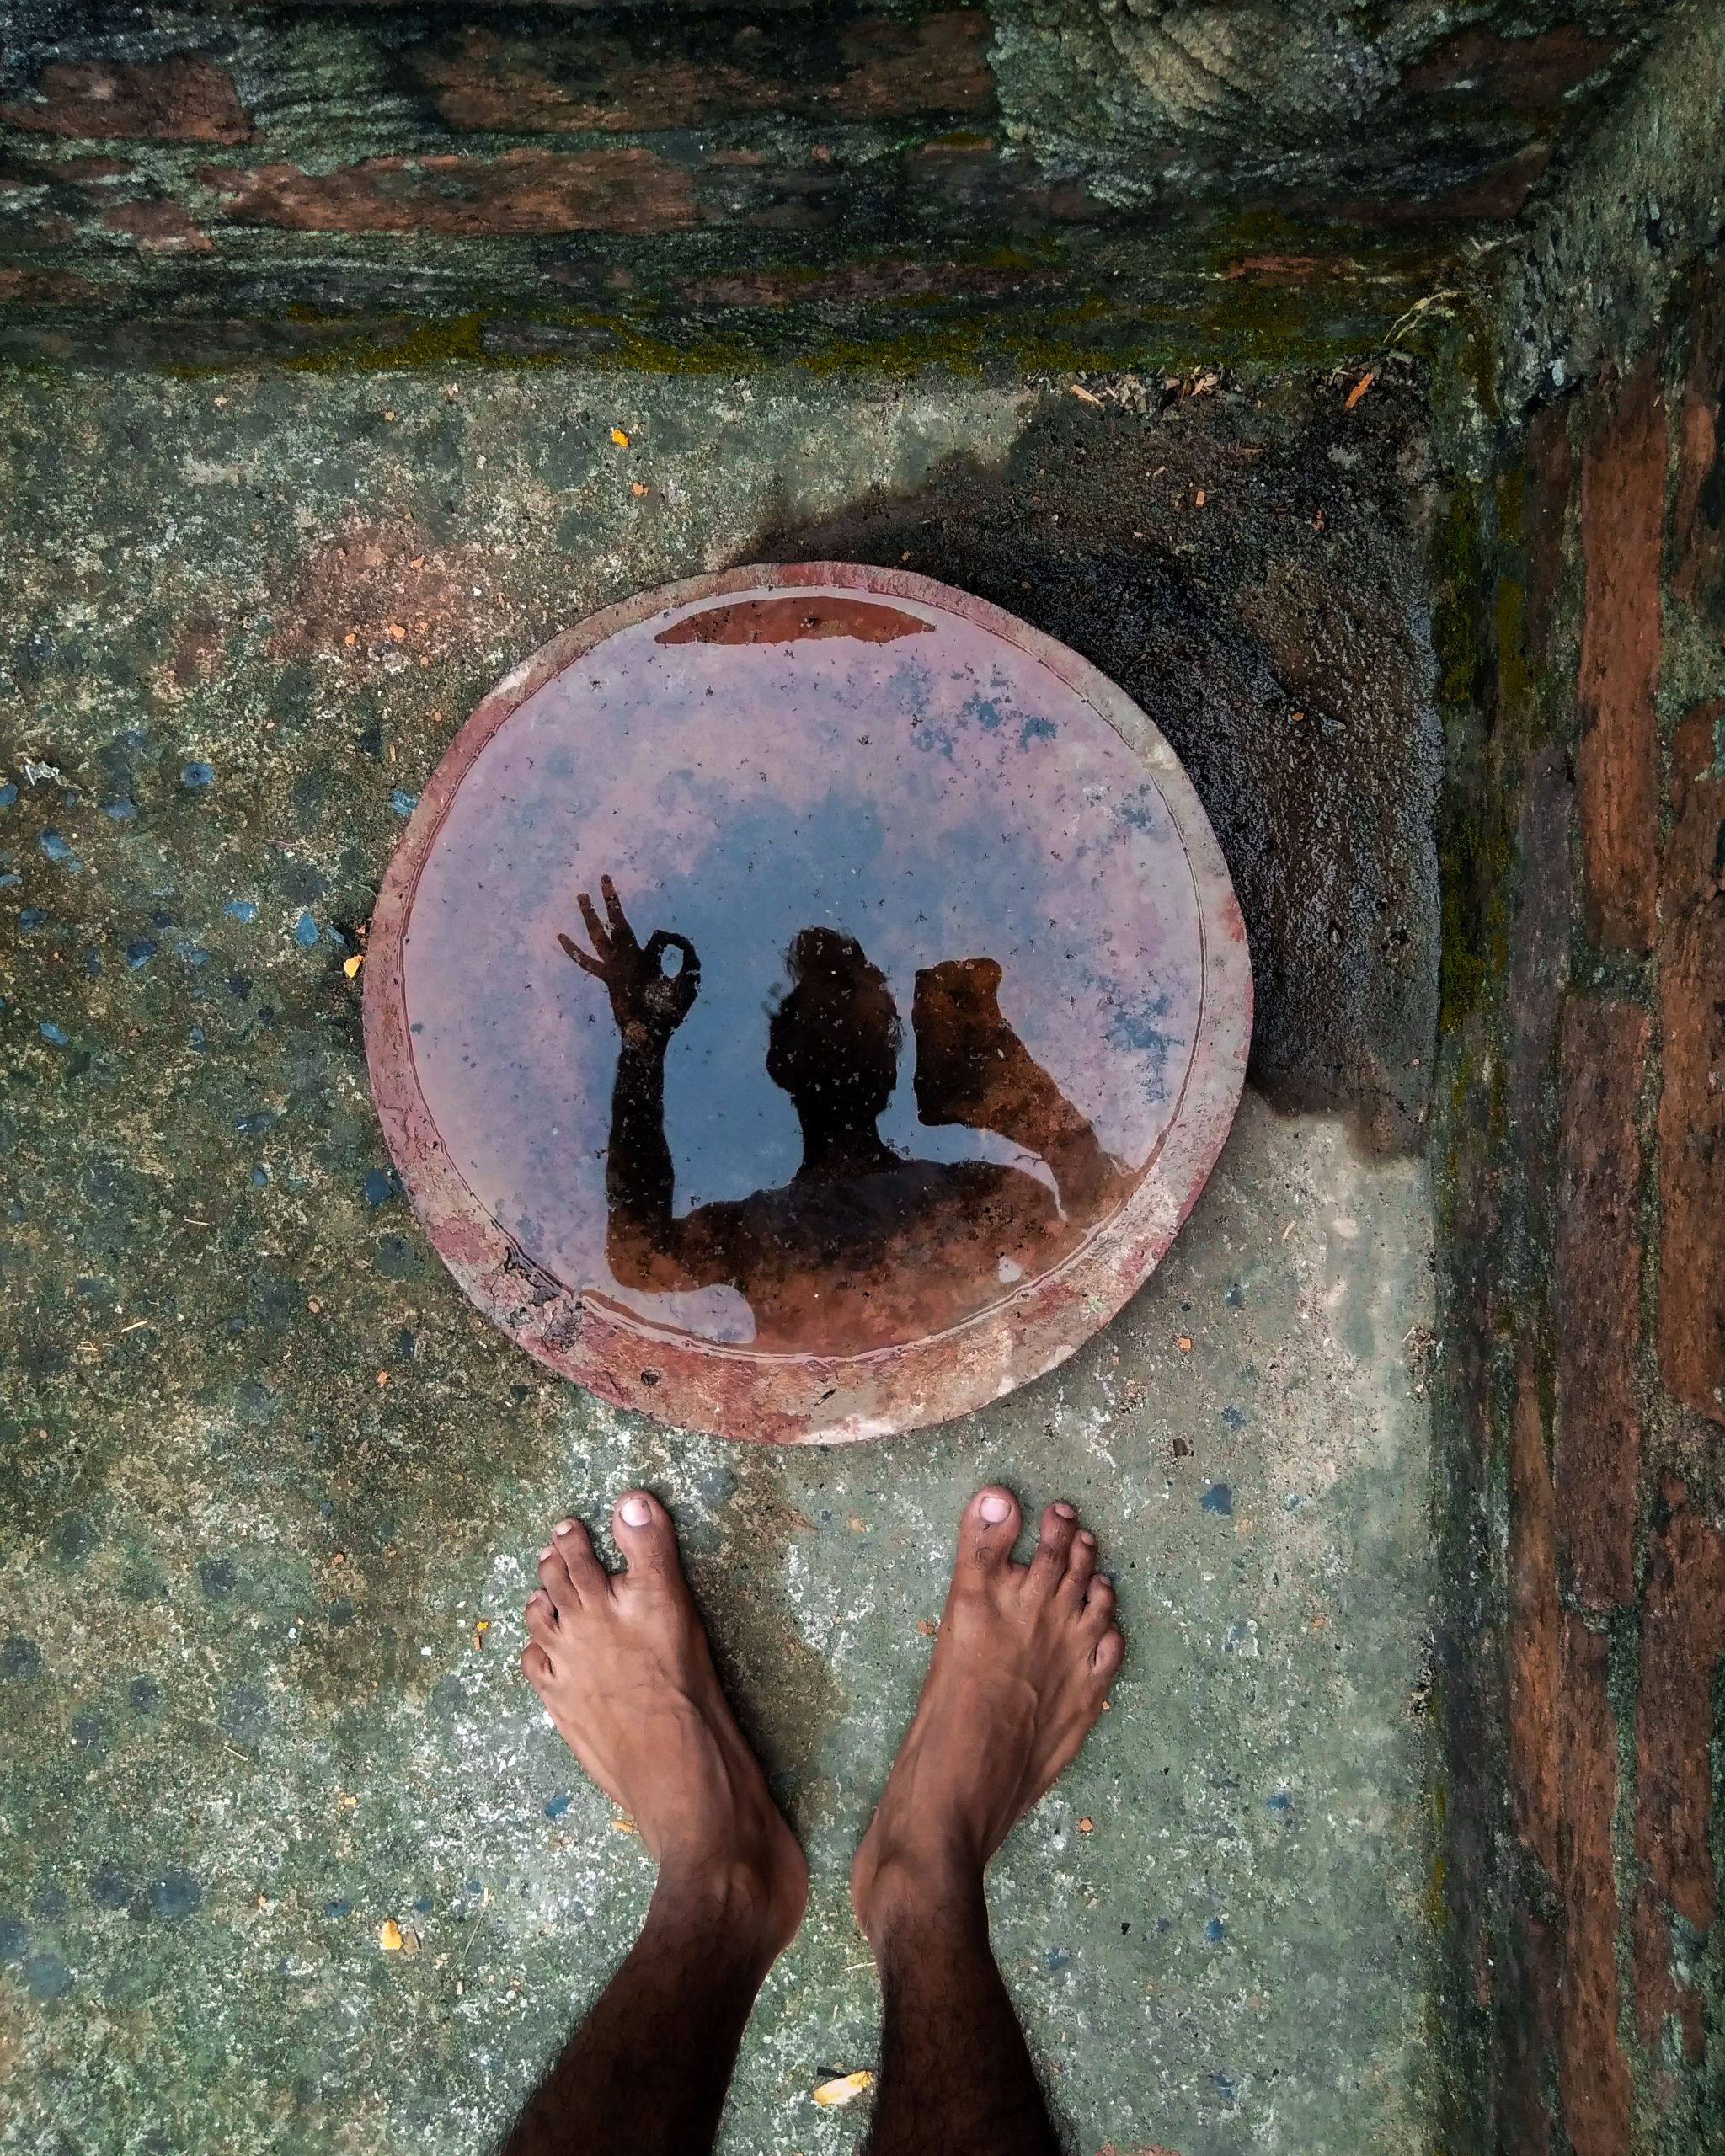 Reflection on water pot